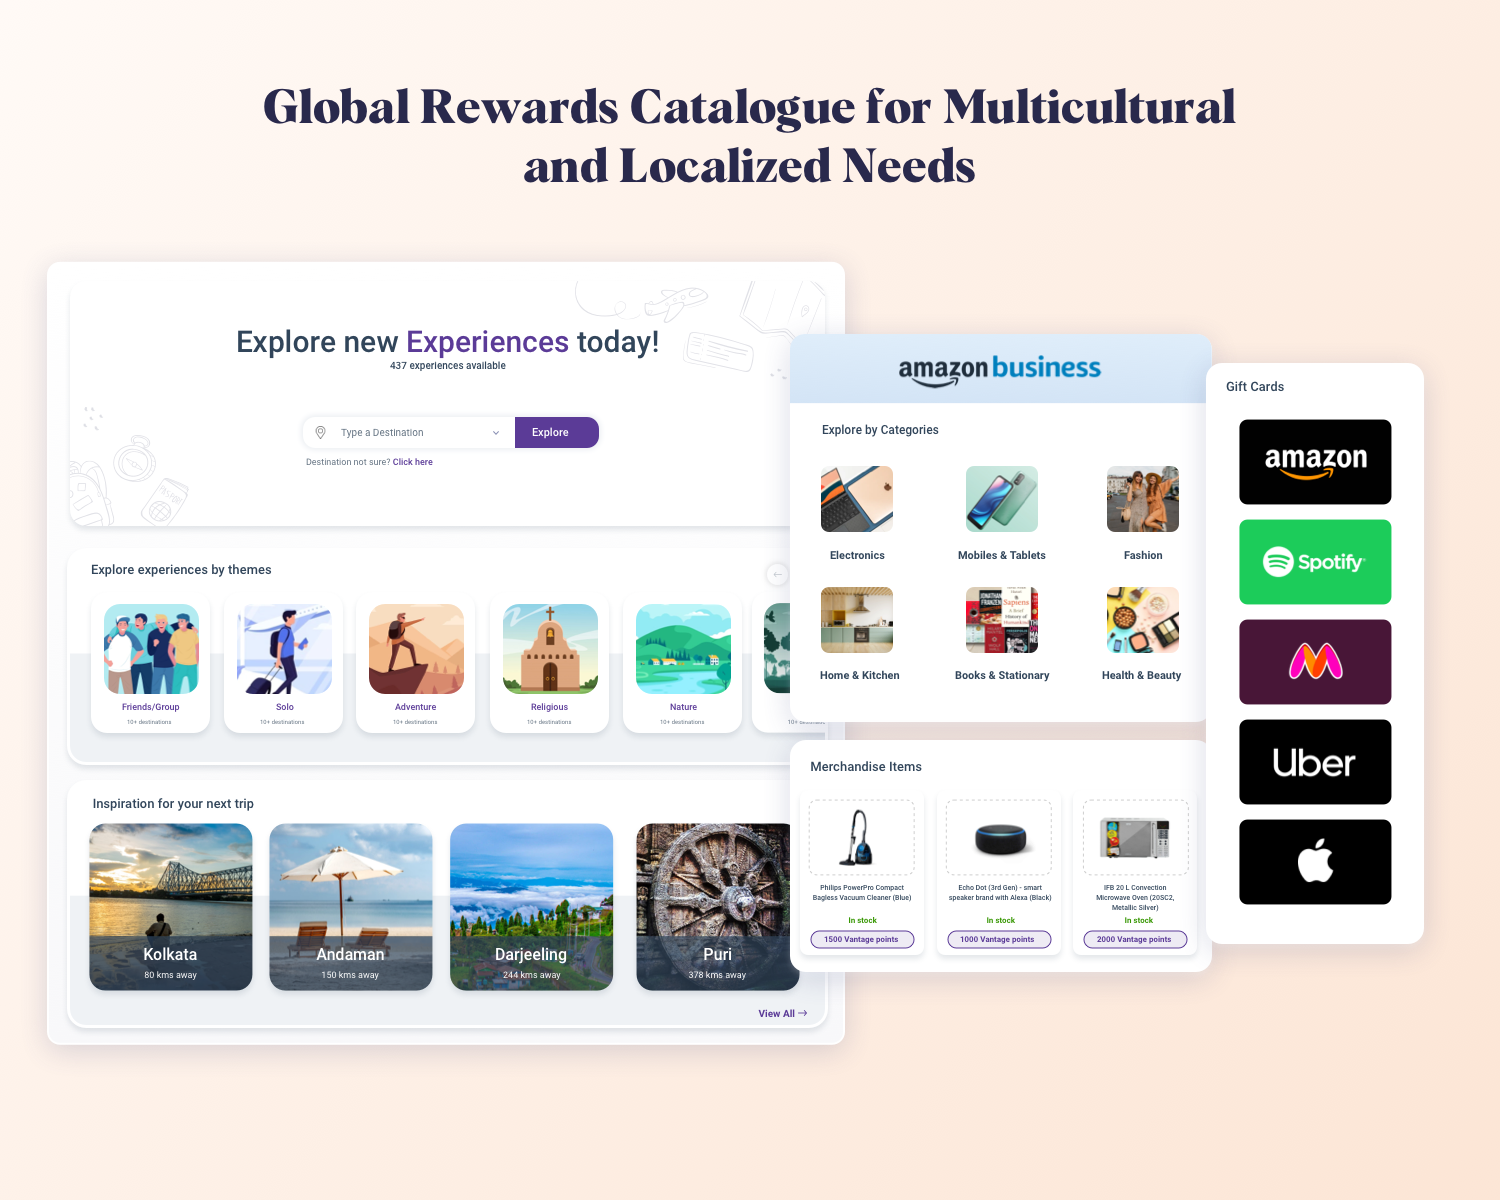 A Global Rewards Catalogue for Multi-Cultural and Localised Needs.